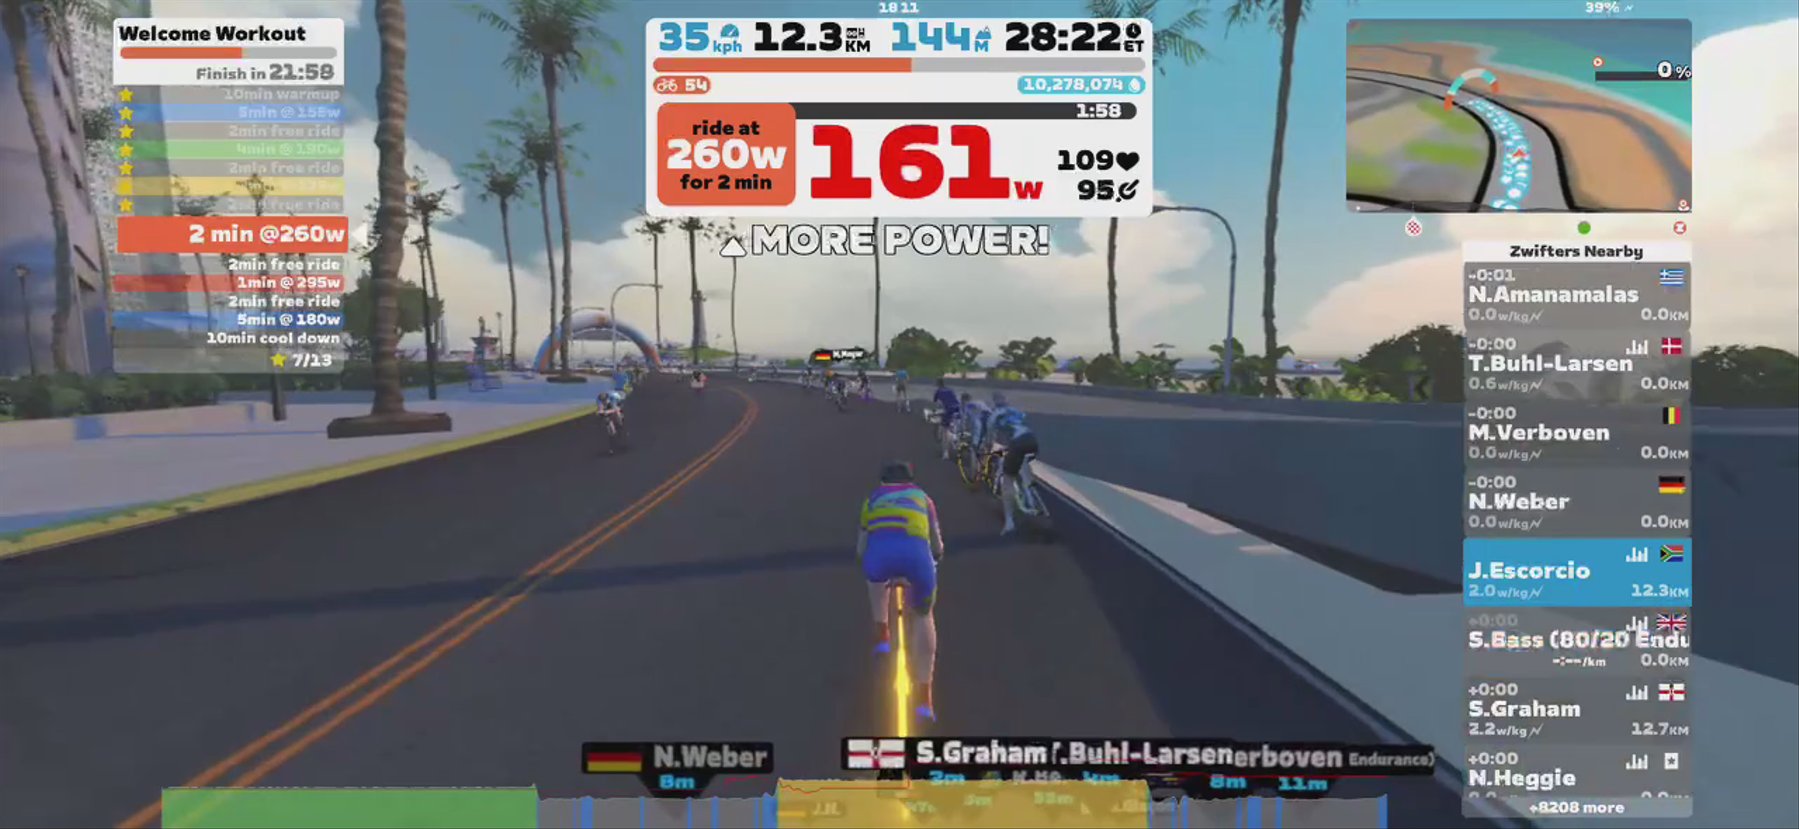 Zwift - Welcome Workout in Watopia